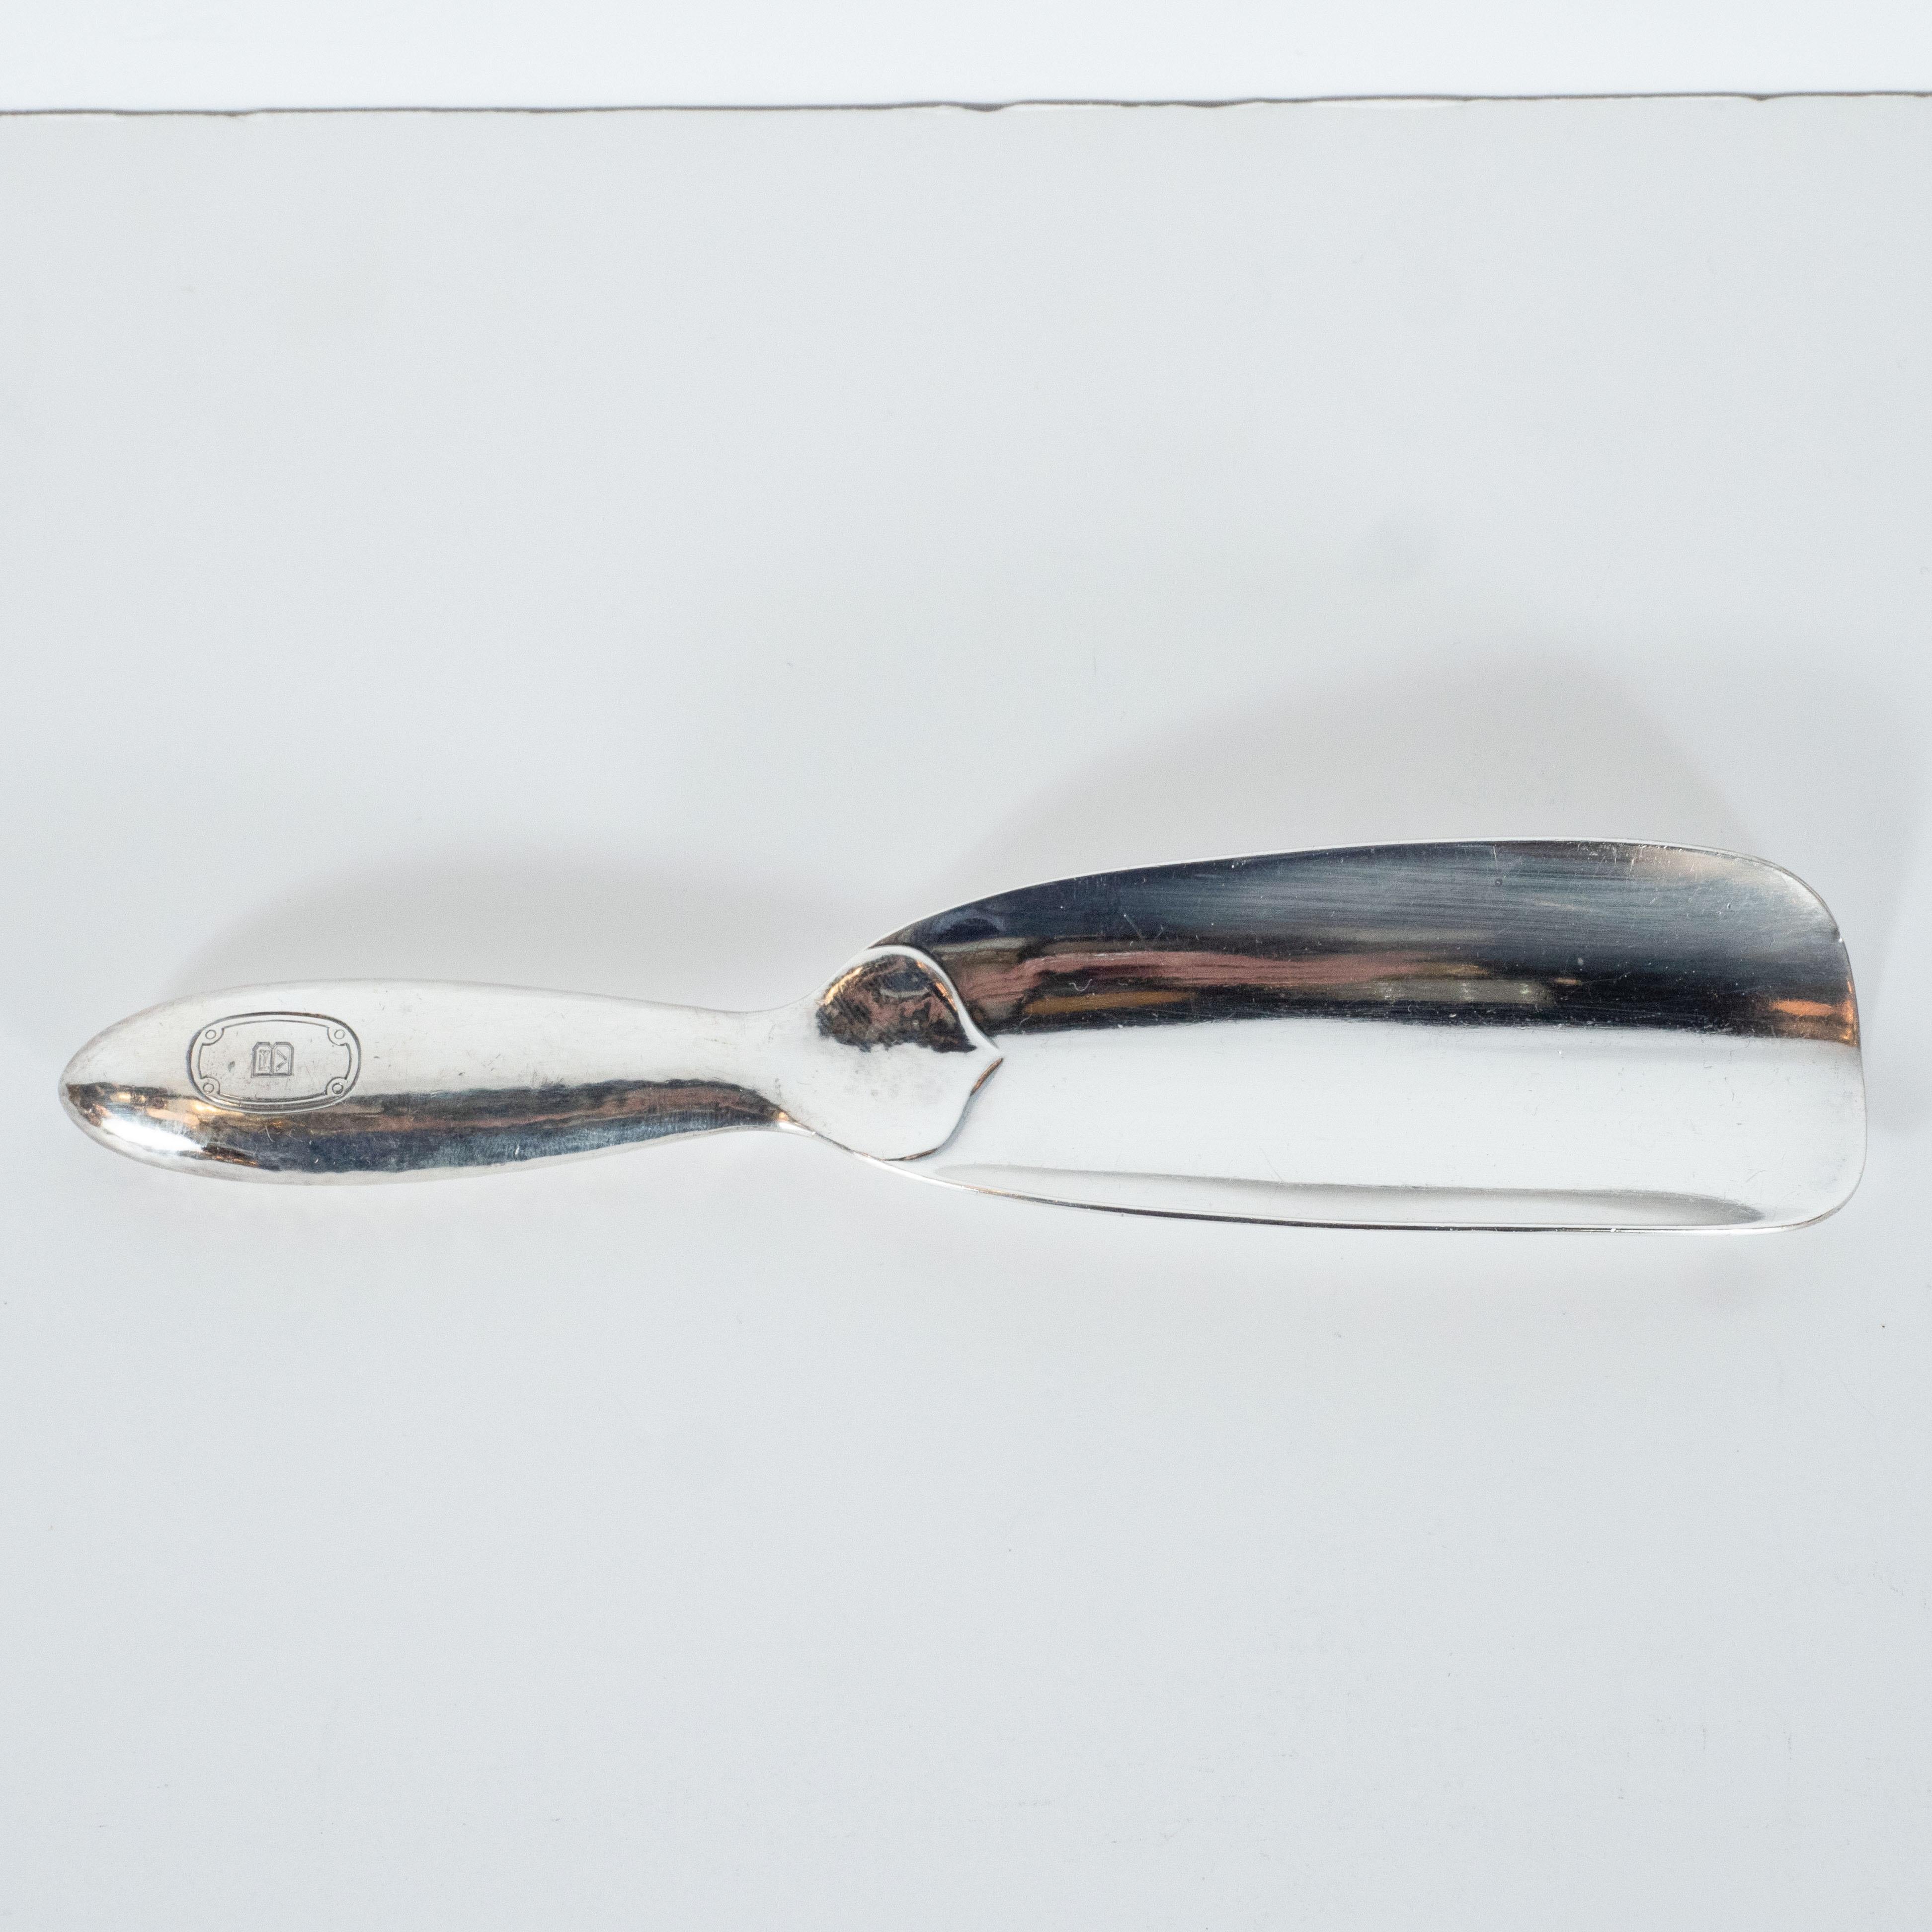 This elegant shoe horn was realized in the United States by Tiffany & Co.- one of America's most illustrious and storied makers of jewelry and sterling silver products, circa 1900. It features a concave body with hand hammered handle with a subtle